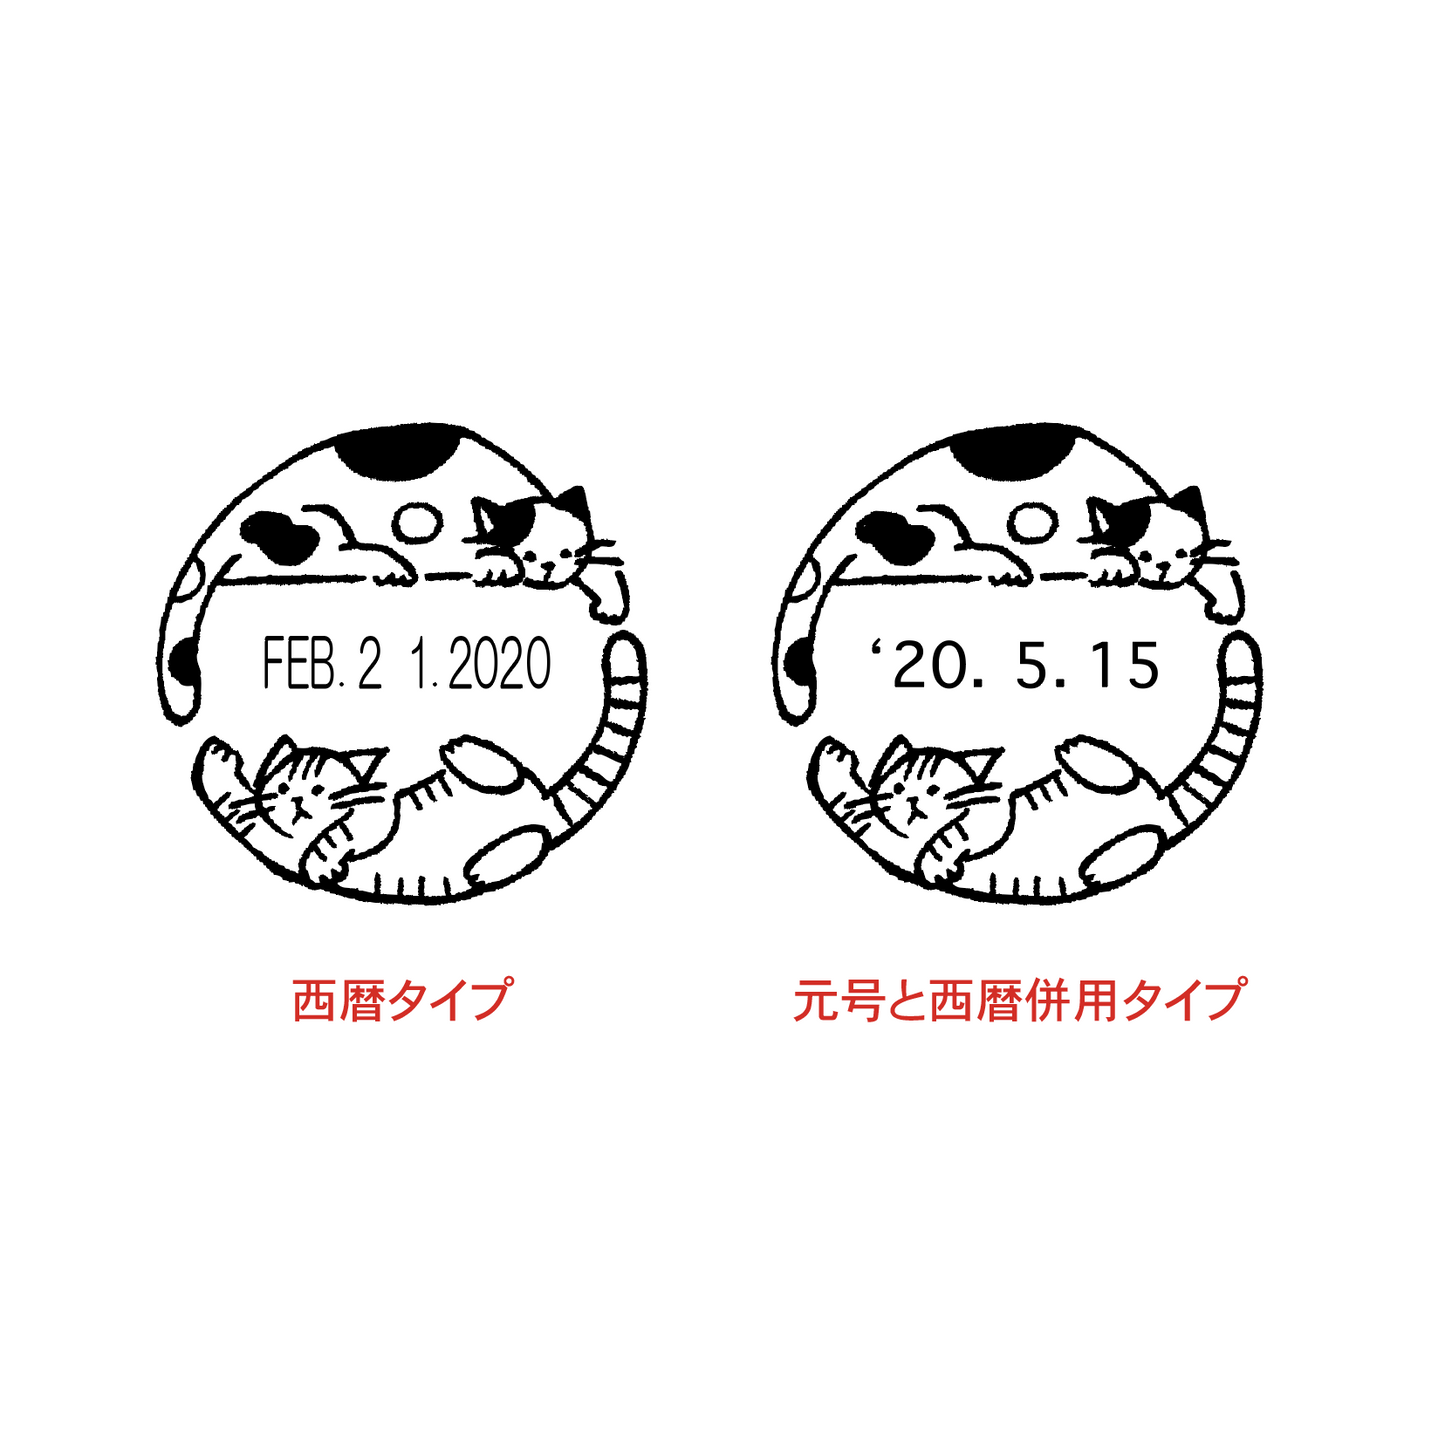 [Limited Item] Sanby x mizushima Frame Date Stamp CHECKED